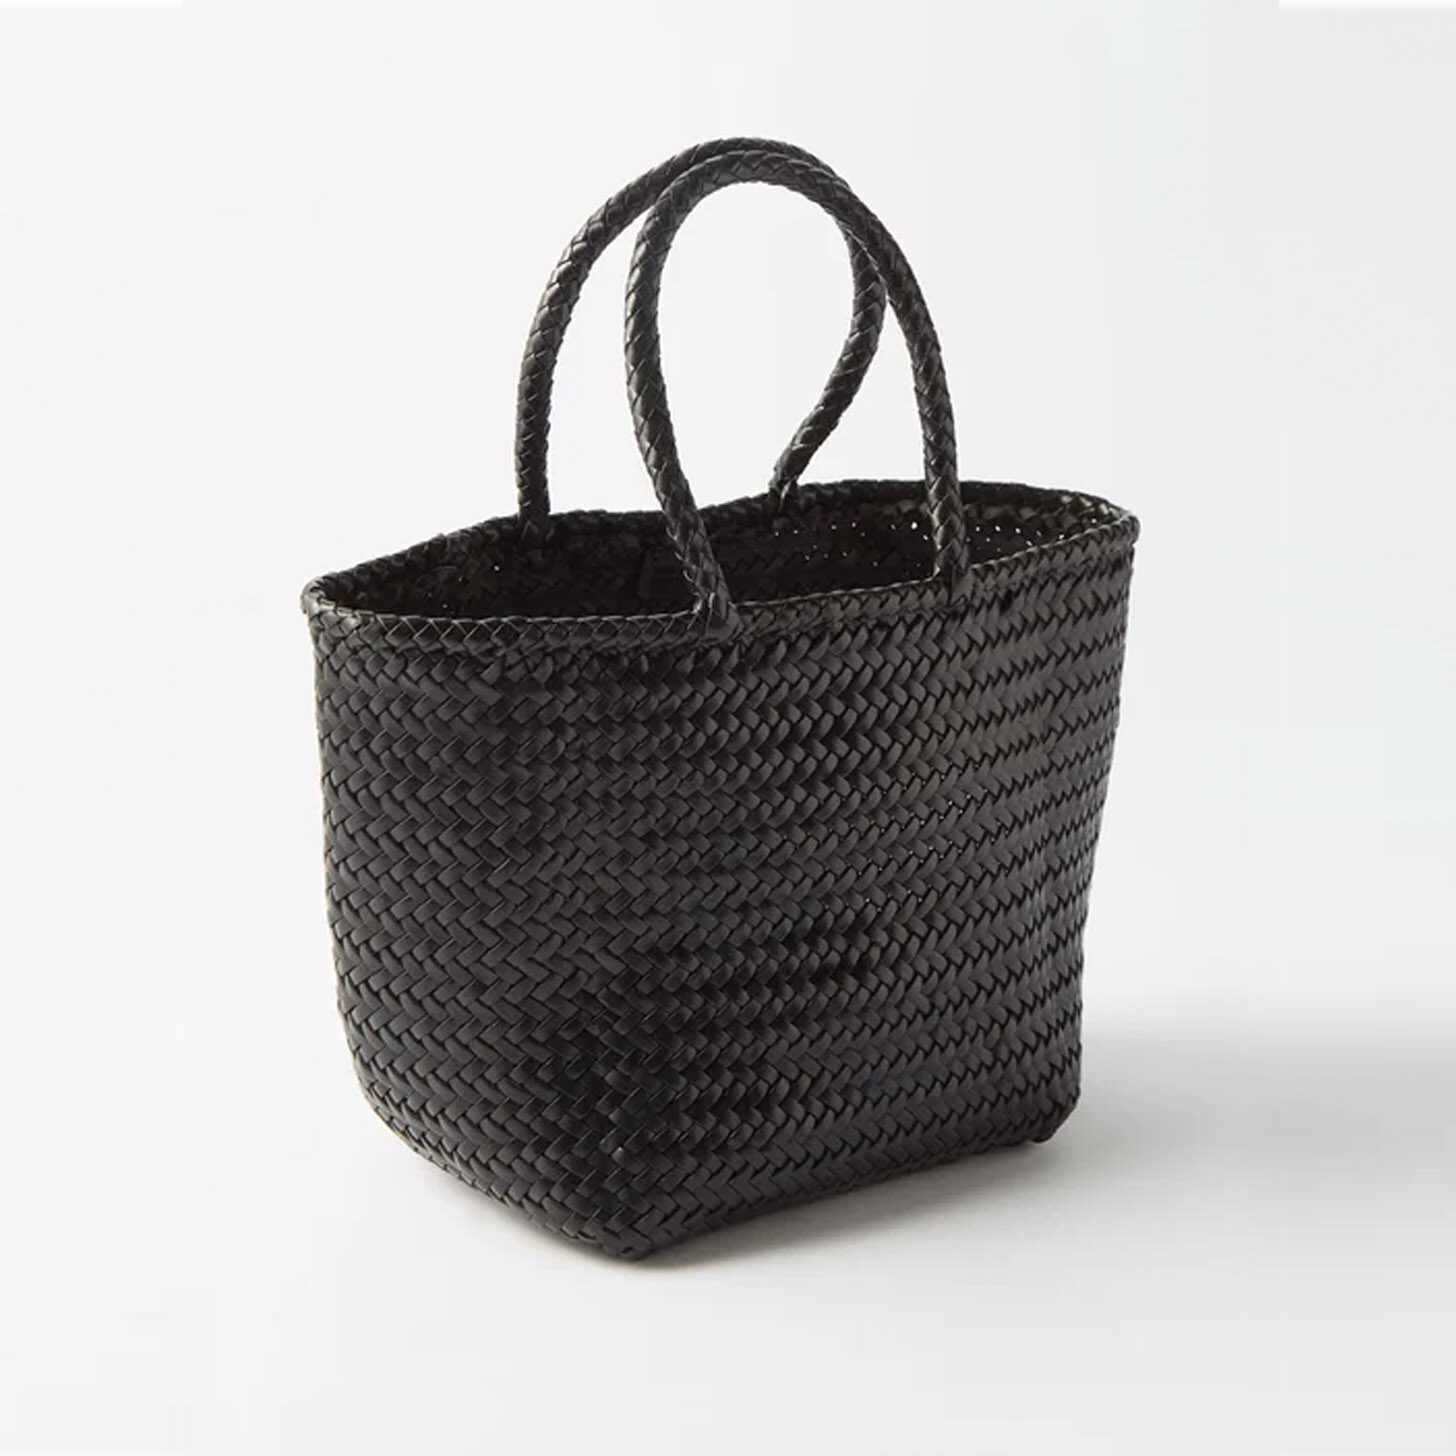 Grace Small Woven Leather Basket Bag